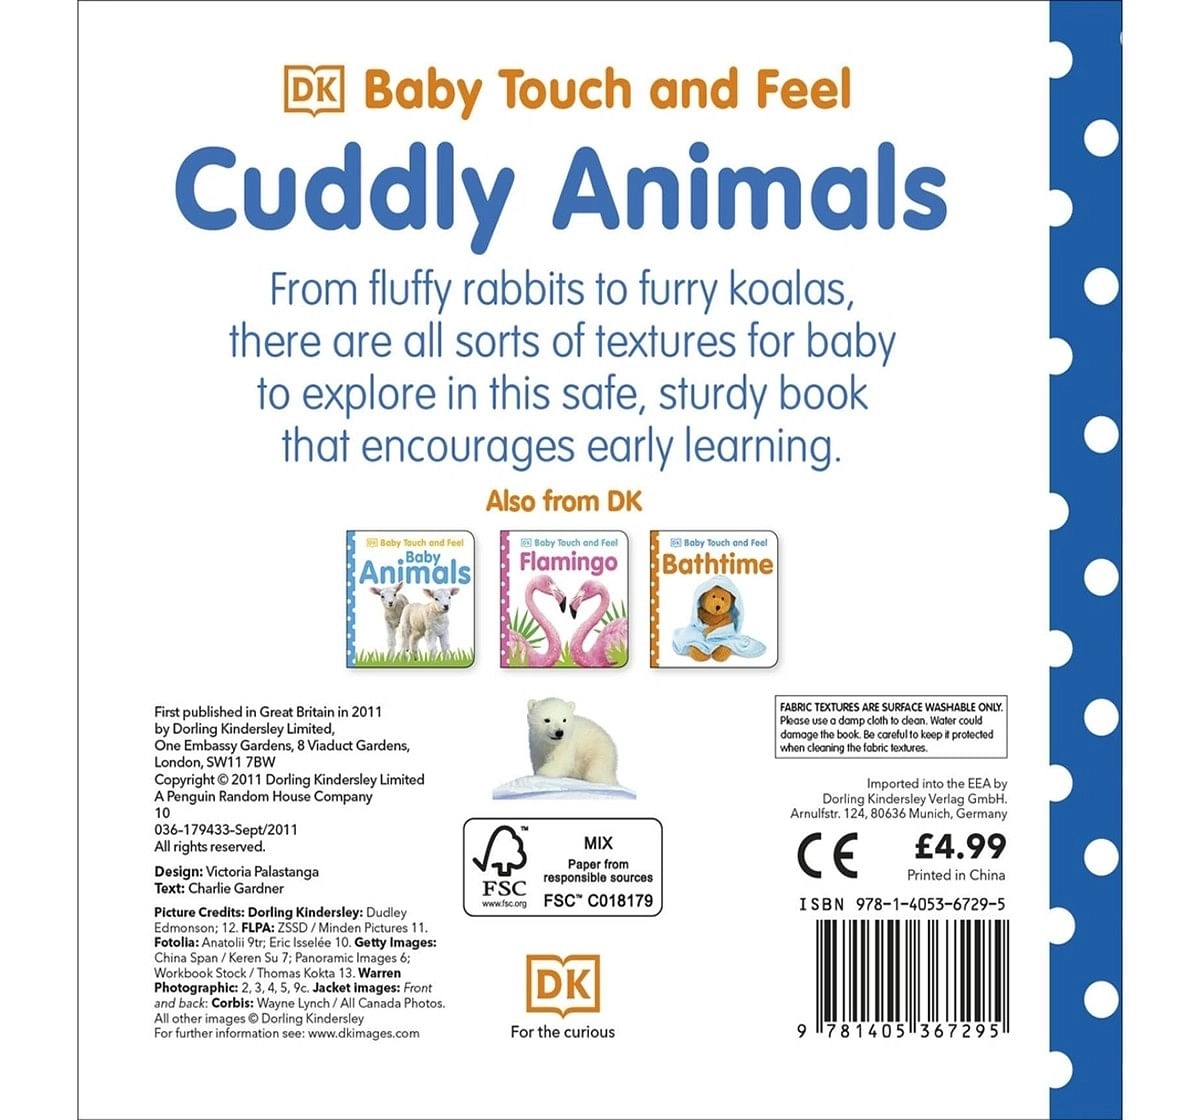 Baby Touch & Feel : Cuddly Animals, 904 Pages Book by DK Children, Paperback